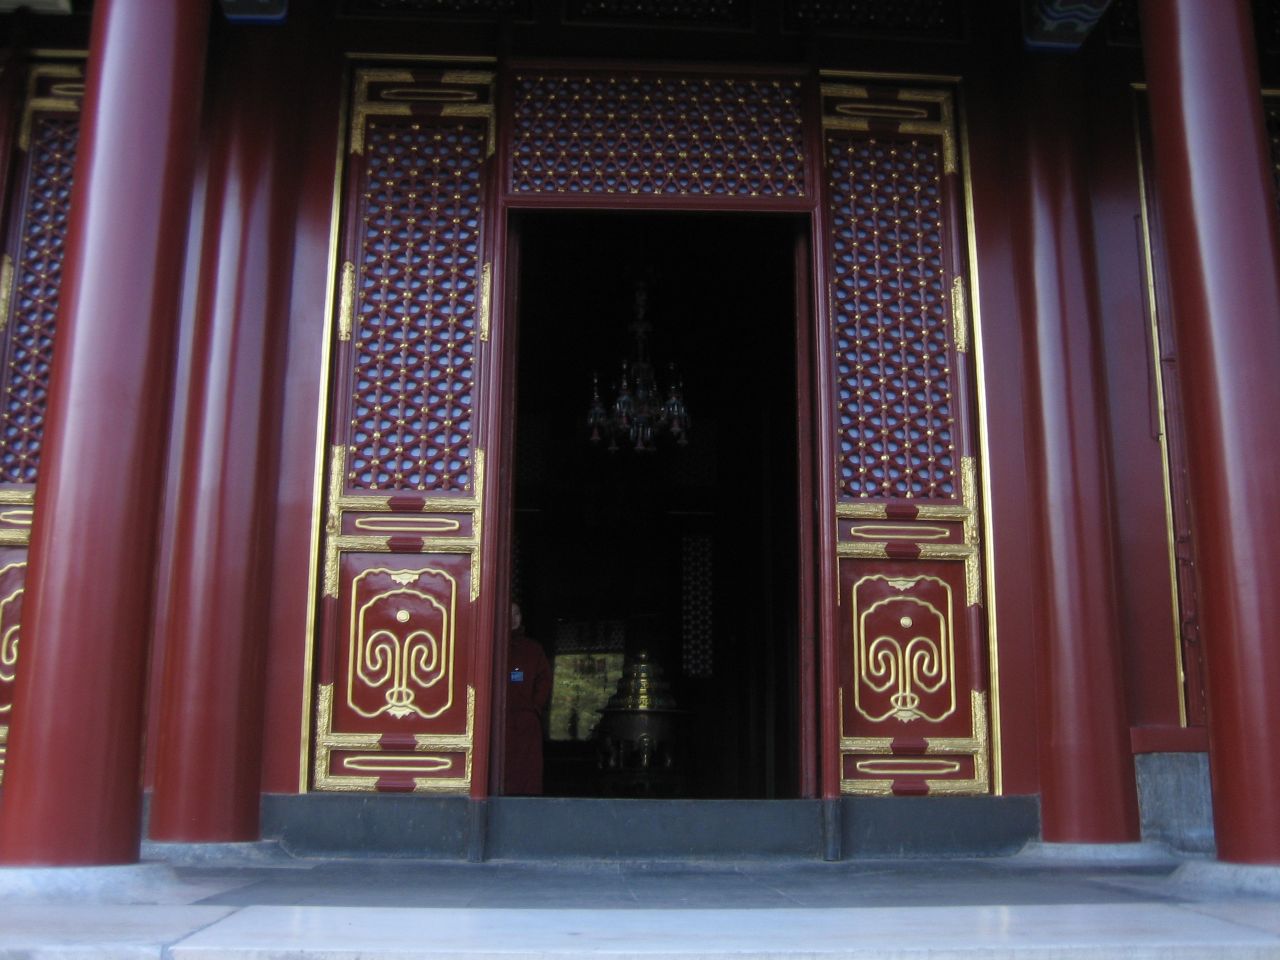 the doors of this oriental building are decorated with gold and red columns